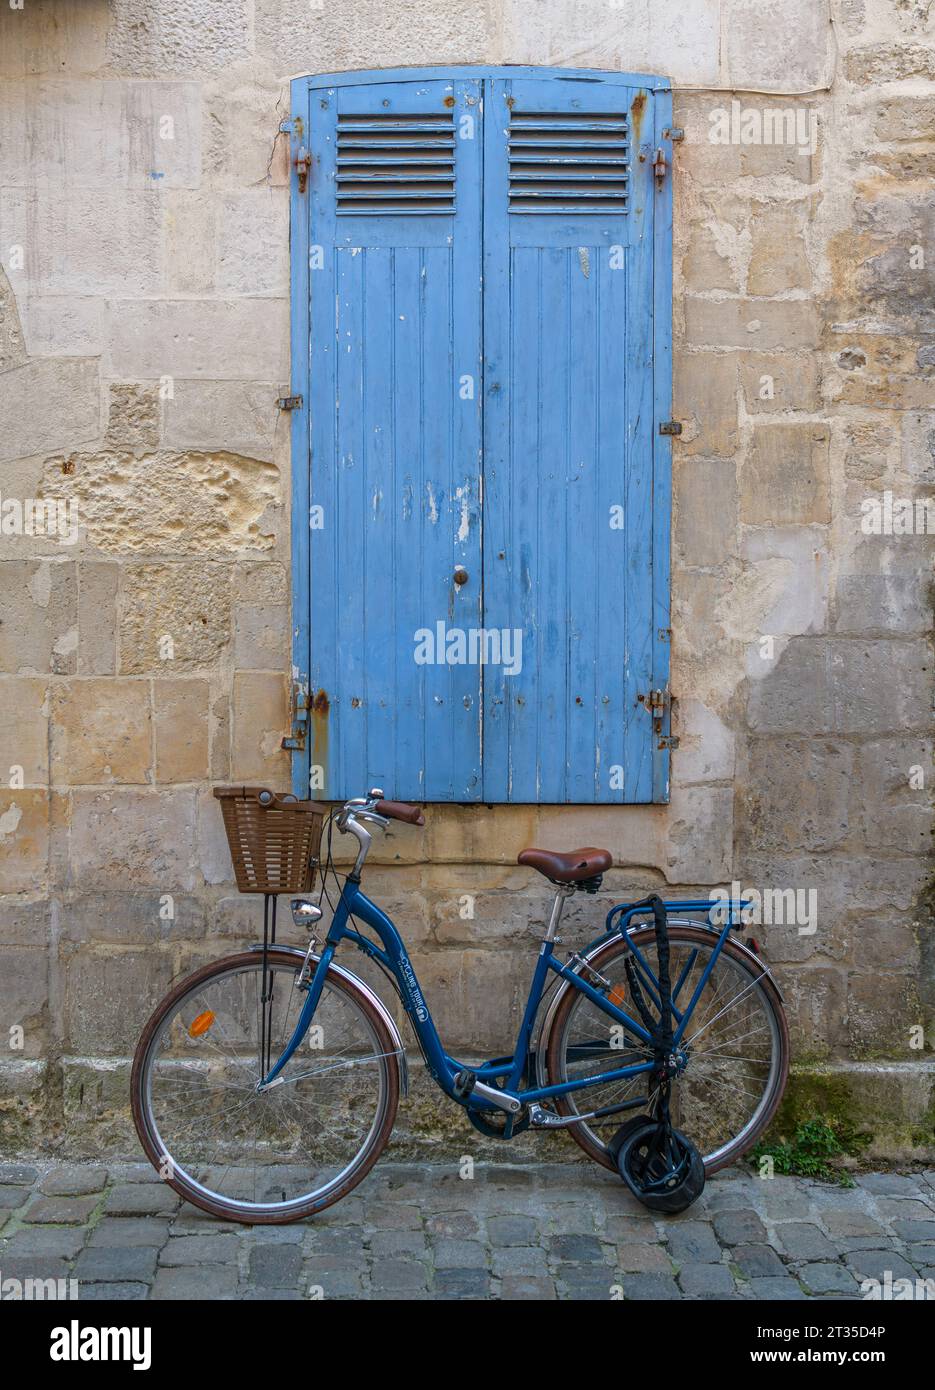 Blue bicycle with basket and crash helmet chained up, lent against stone wall with closed, blue shutters in the seaside town of La Rochelle, France. Stock Photo